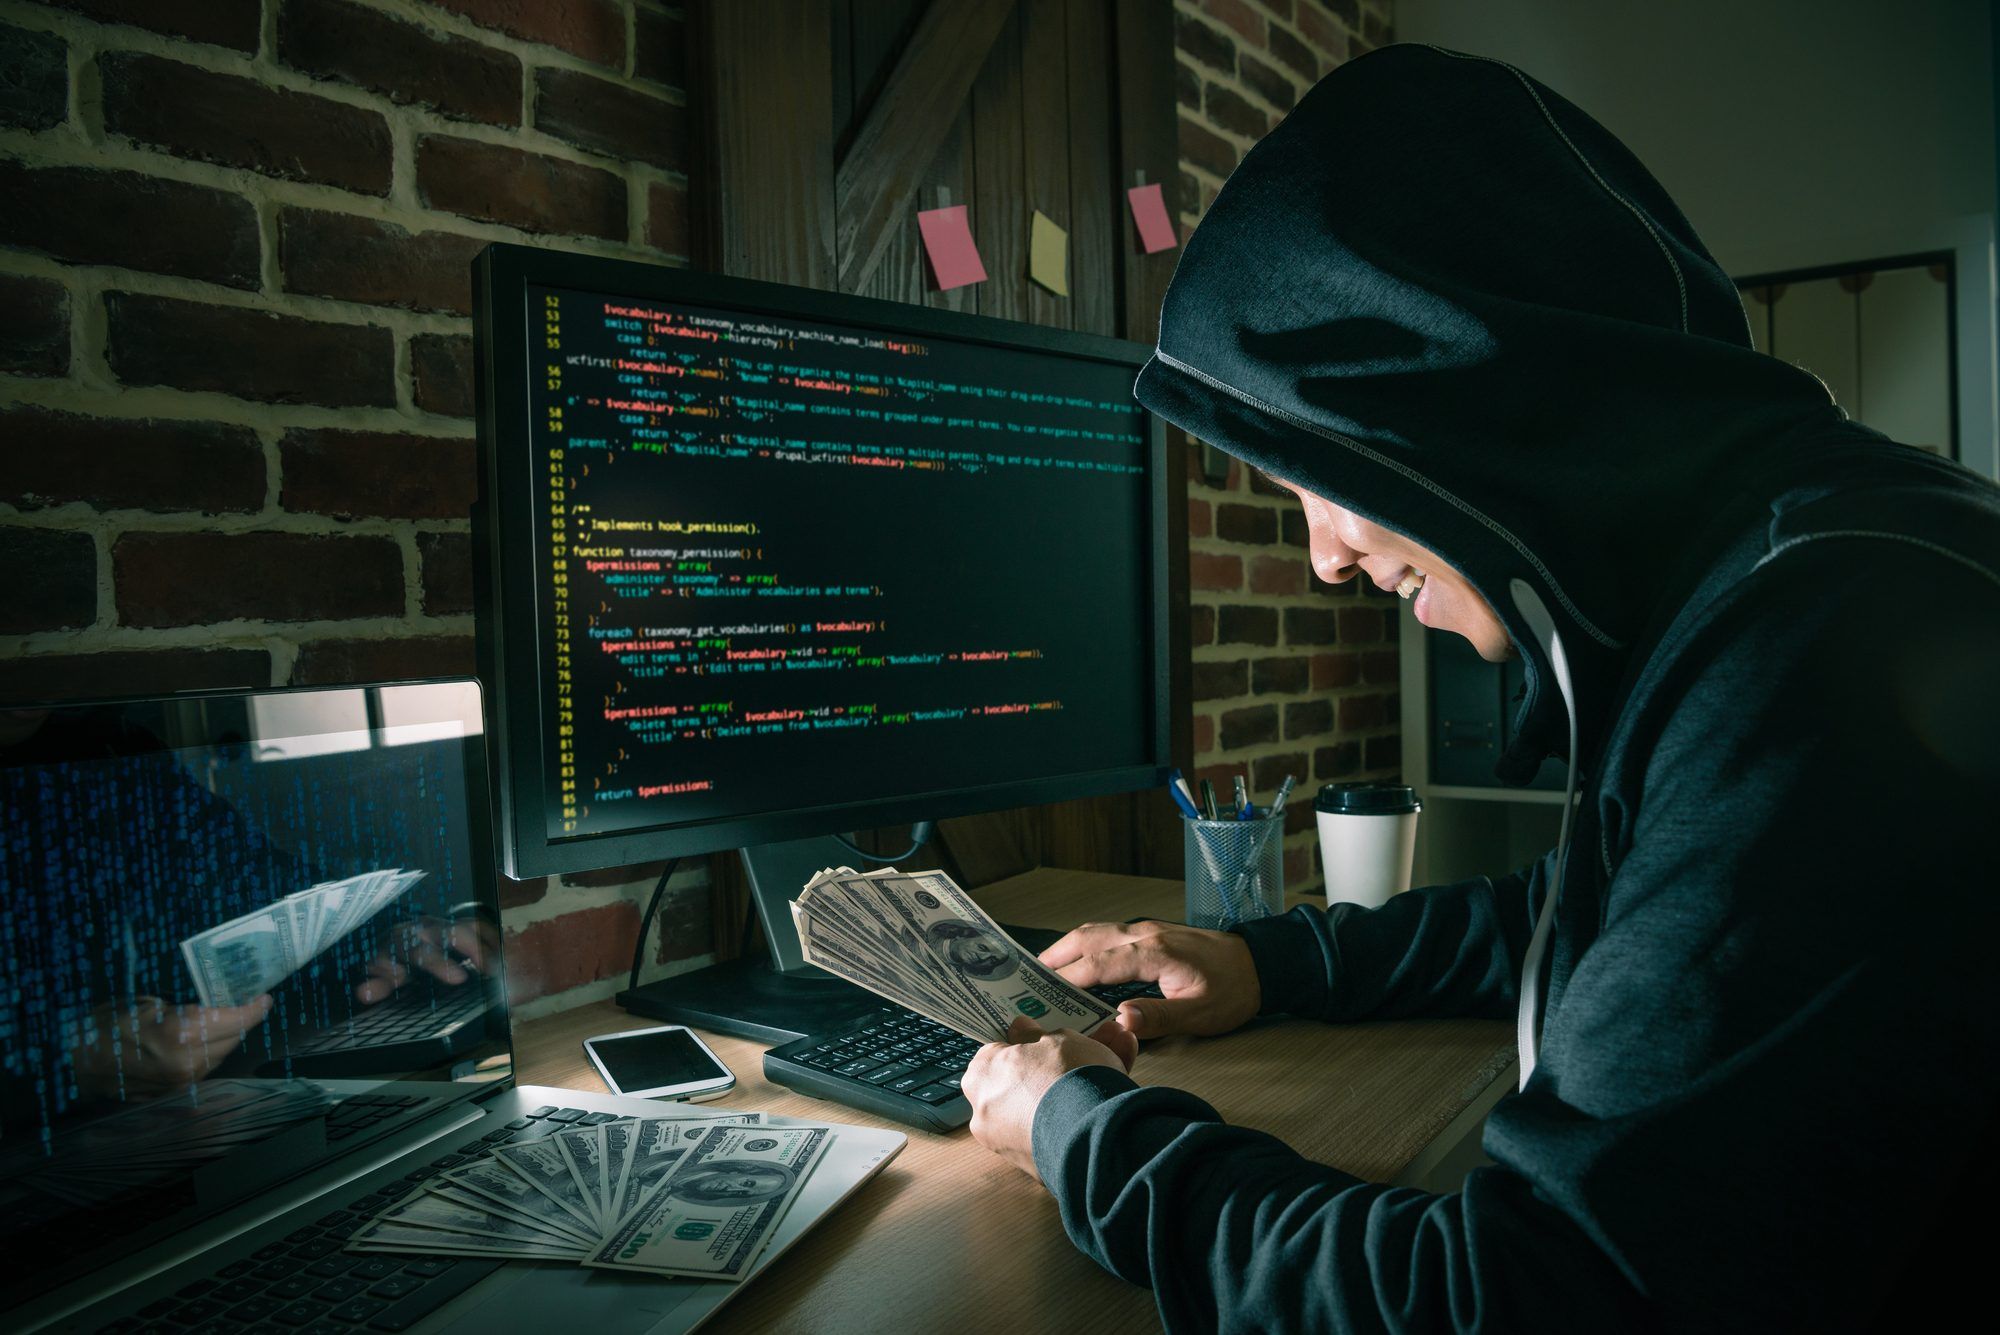 Smiling hacker counts money while sitting in front of computer monitor